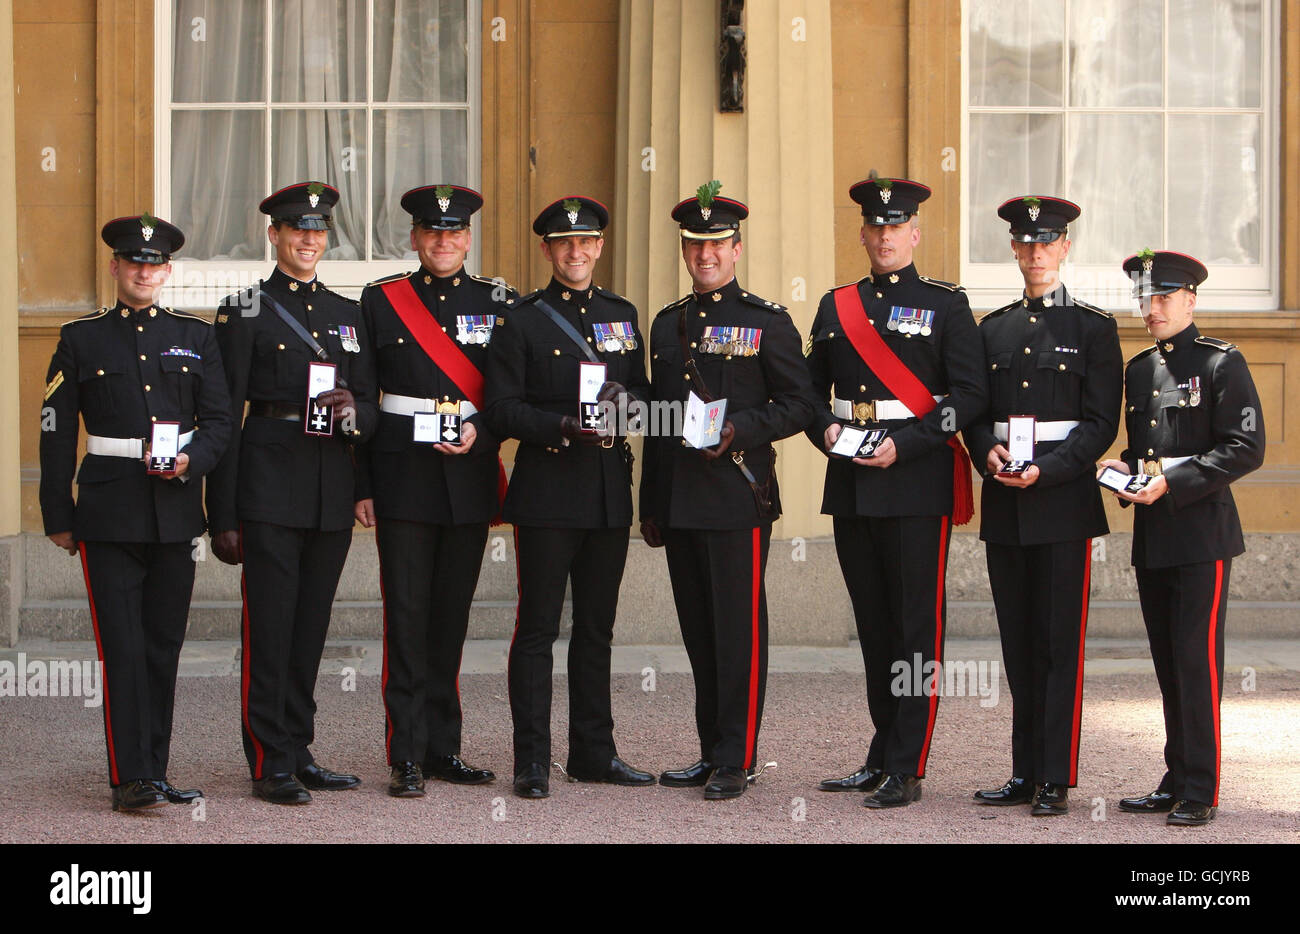 Honours ceremony at buckingham palace hi-res stock photography and images -  Alamy